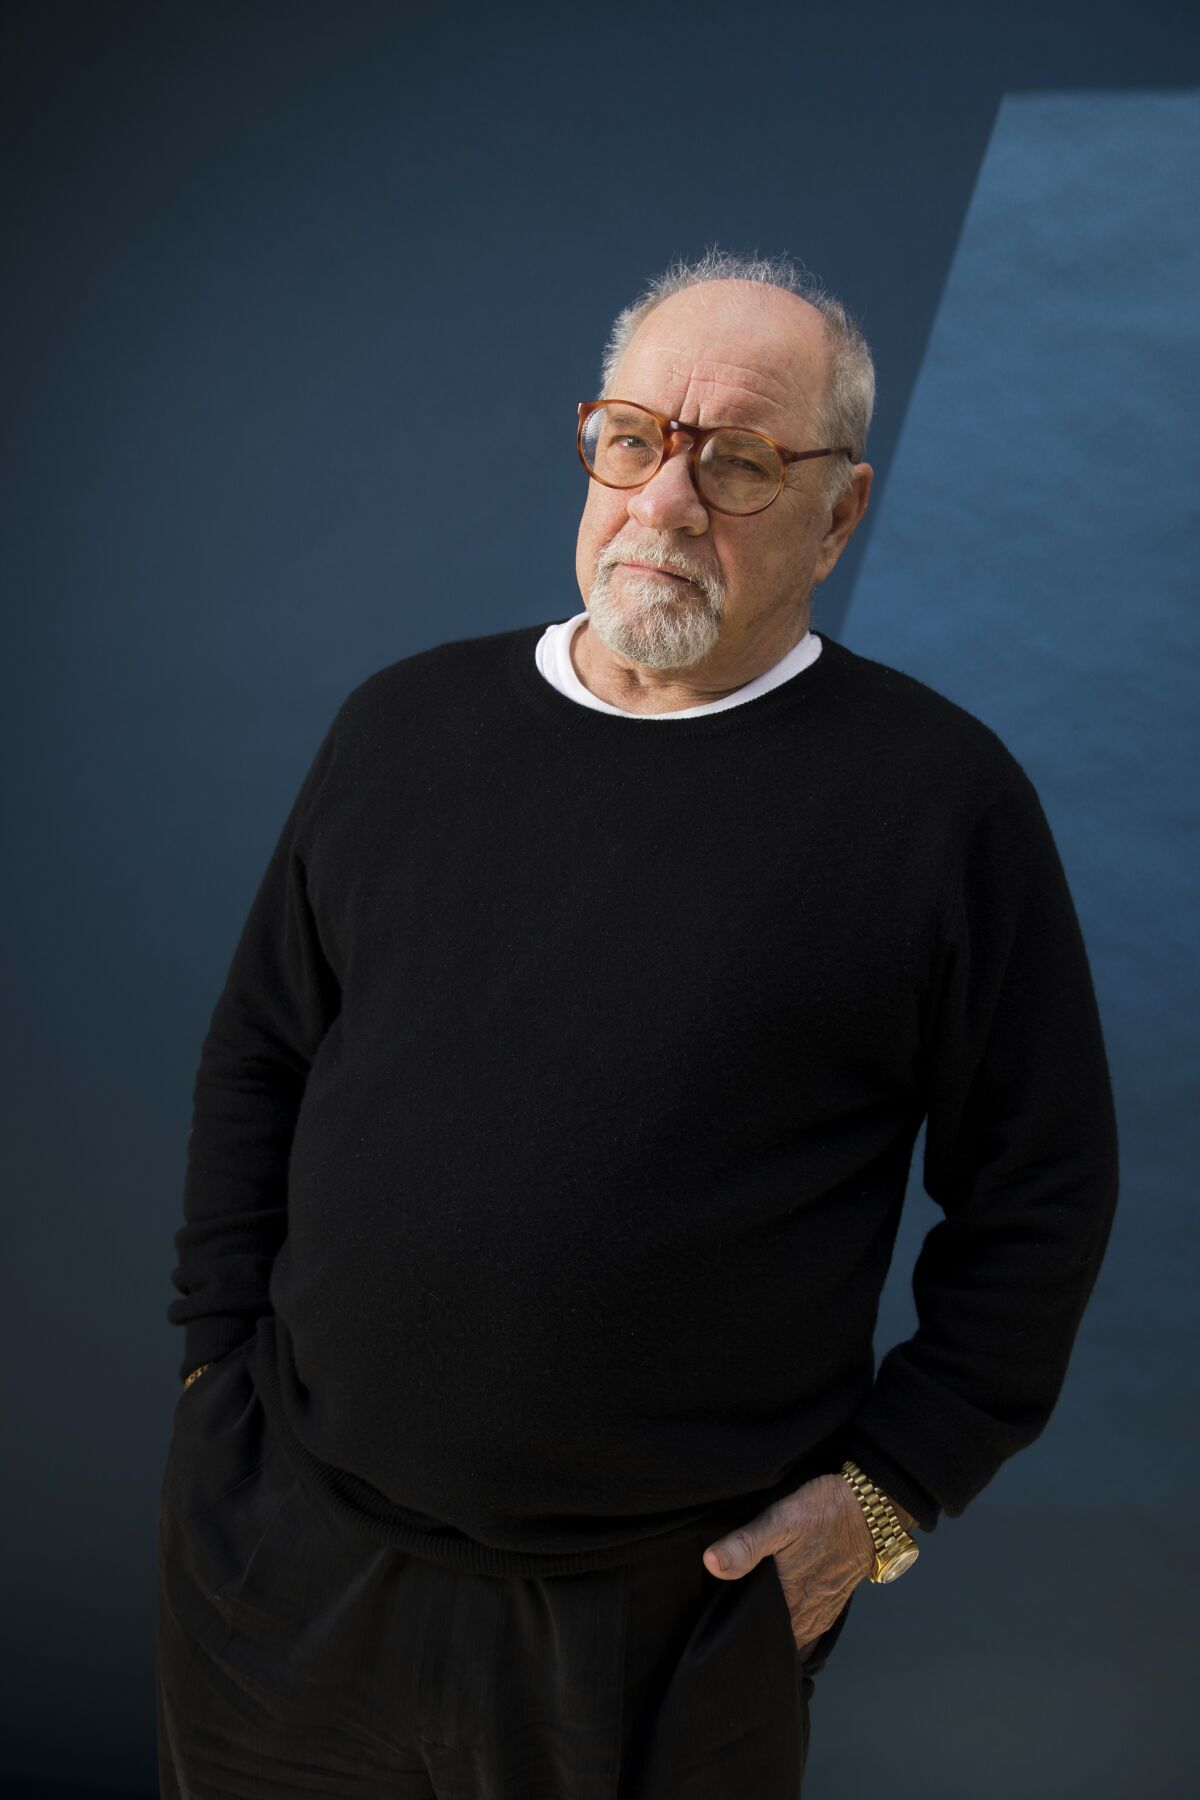 Director/screenwriter Paul Schrader, photographed in 2018.